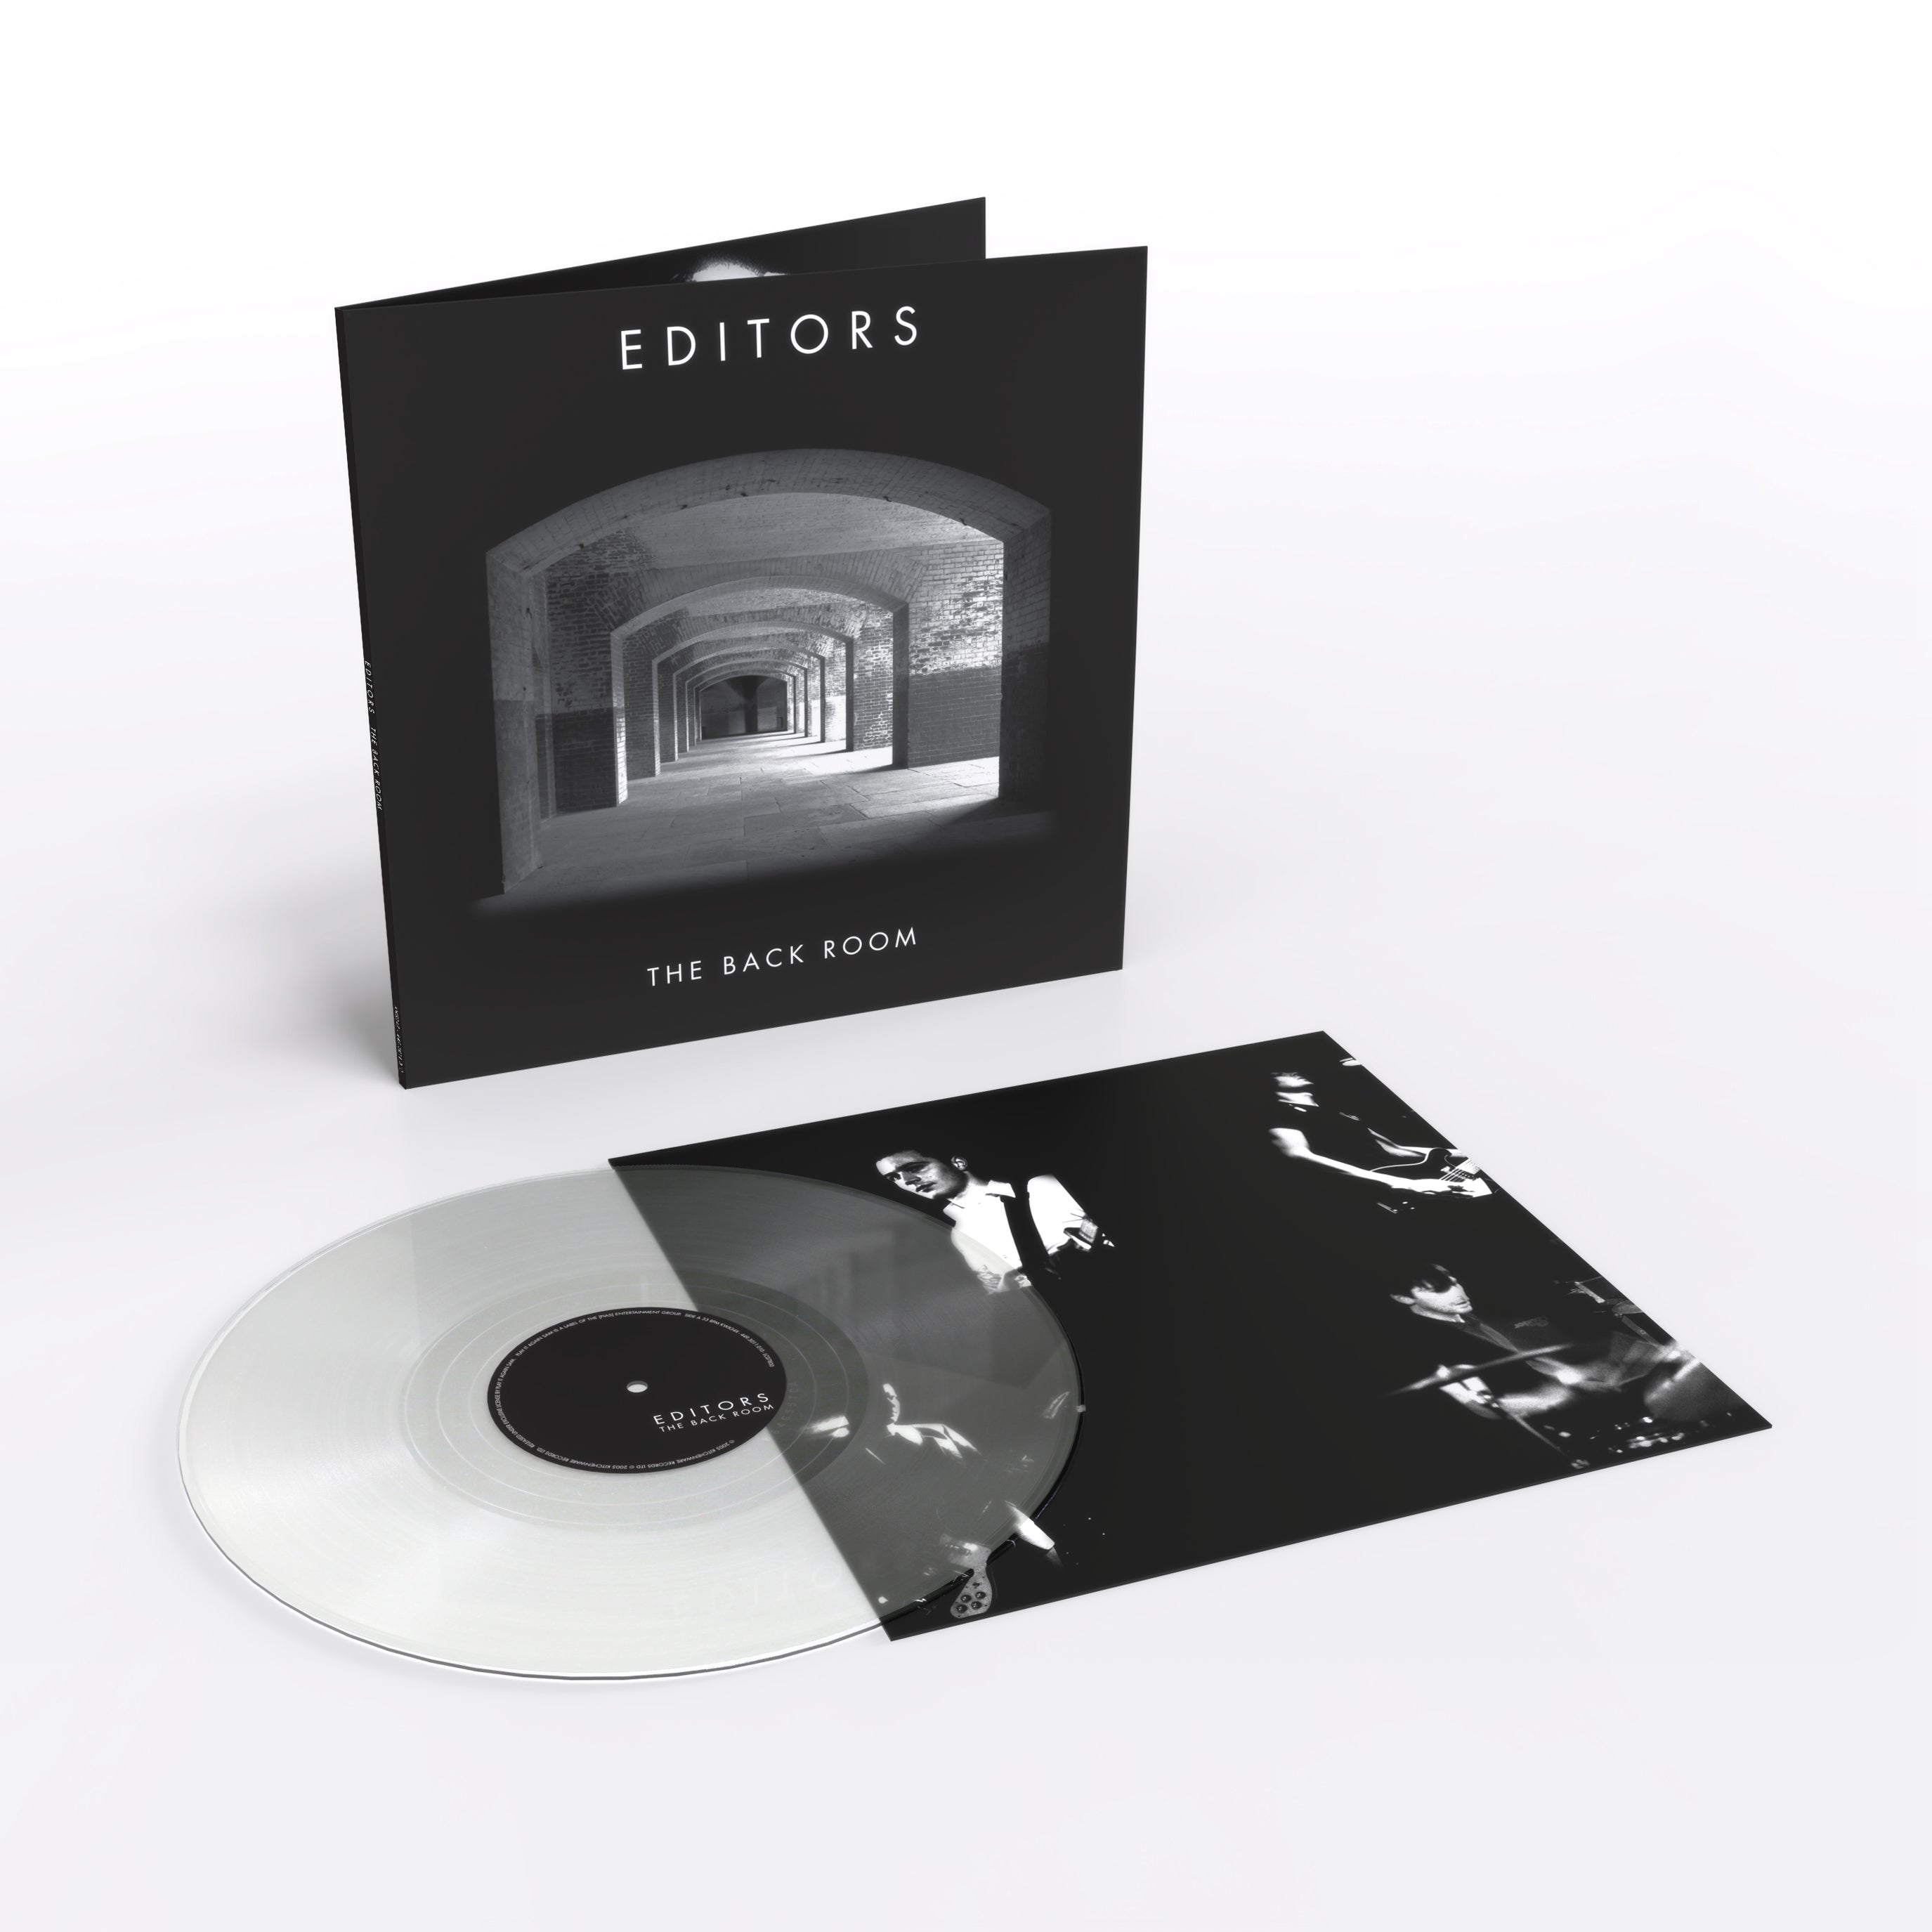 Editors - The Back Room - [PIAS] 40: Limited Clear Vinyl LP